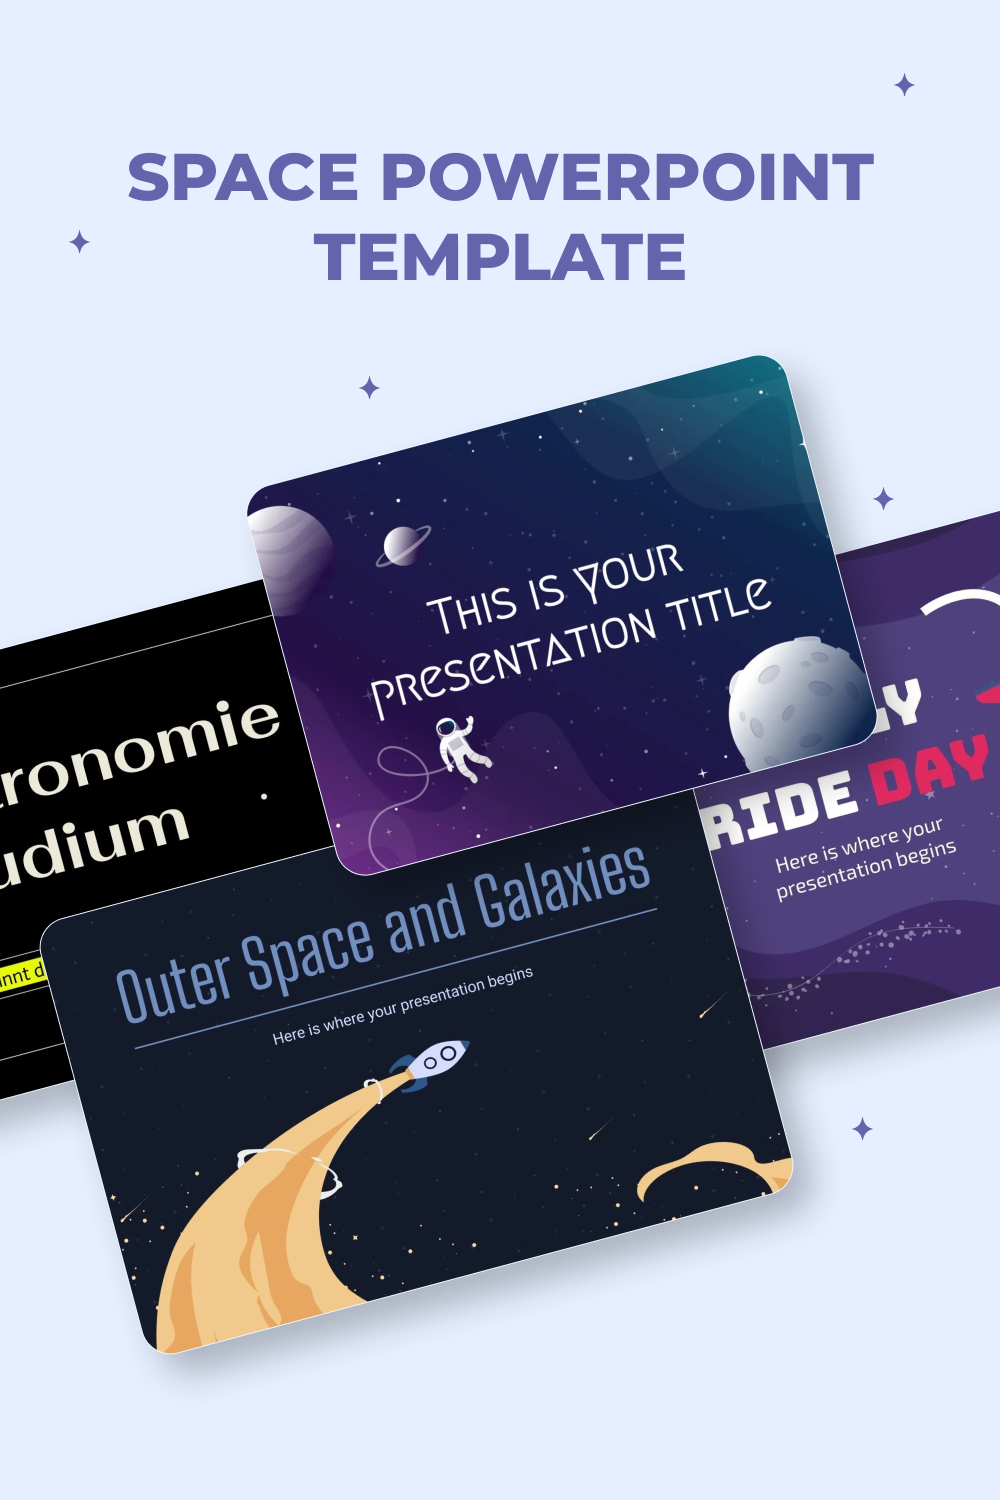 space powerpoint template pinterest 324